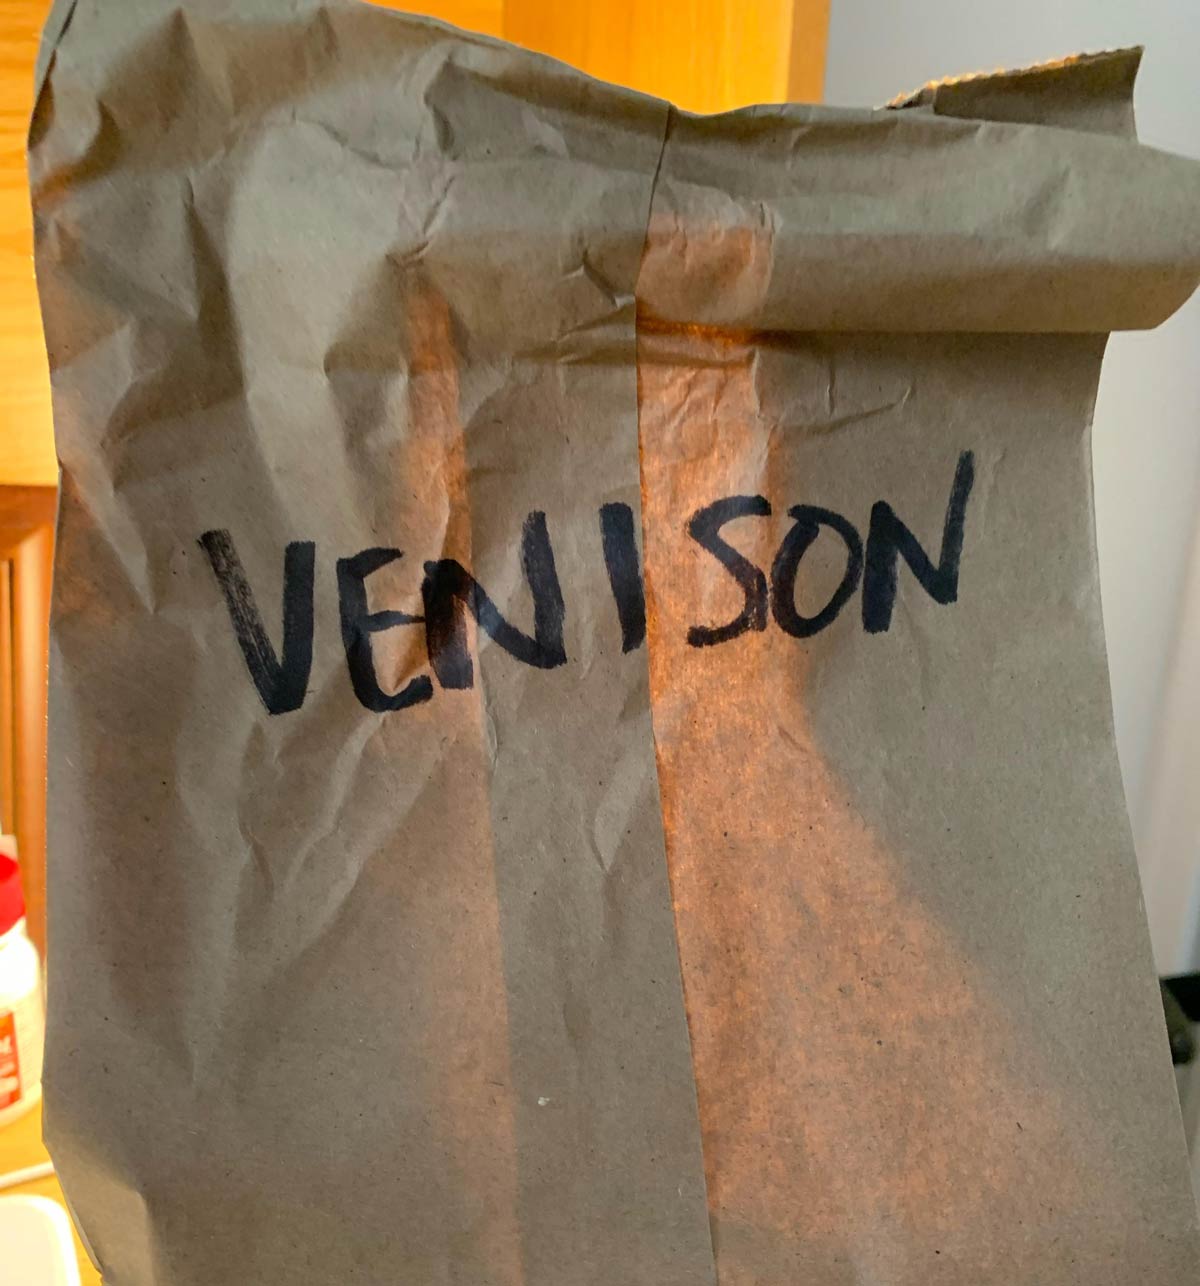 Odd way to spell “Vincent” on my lunch order